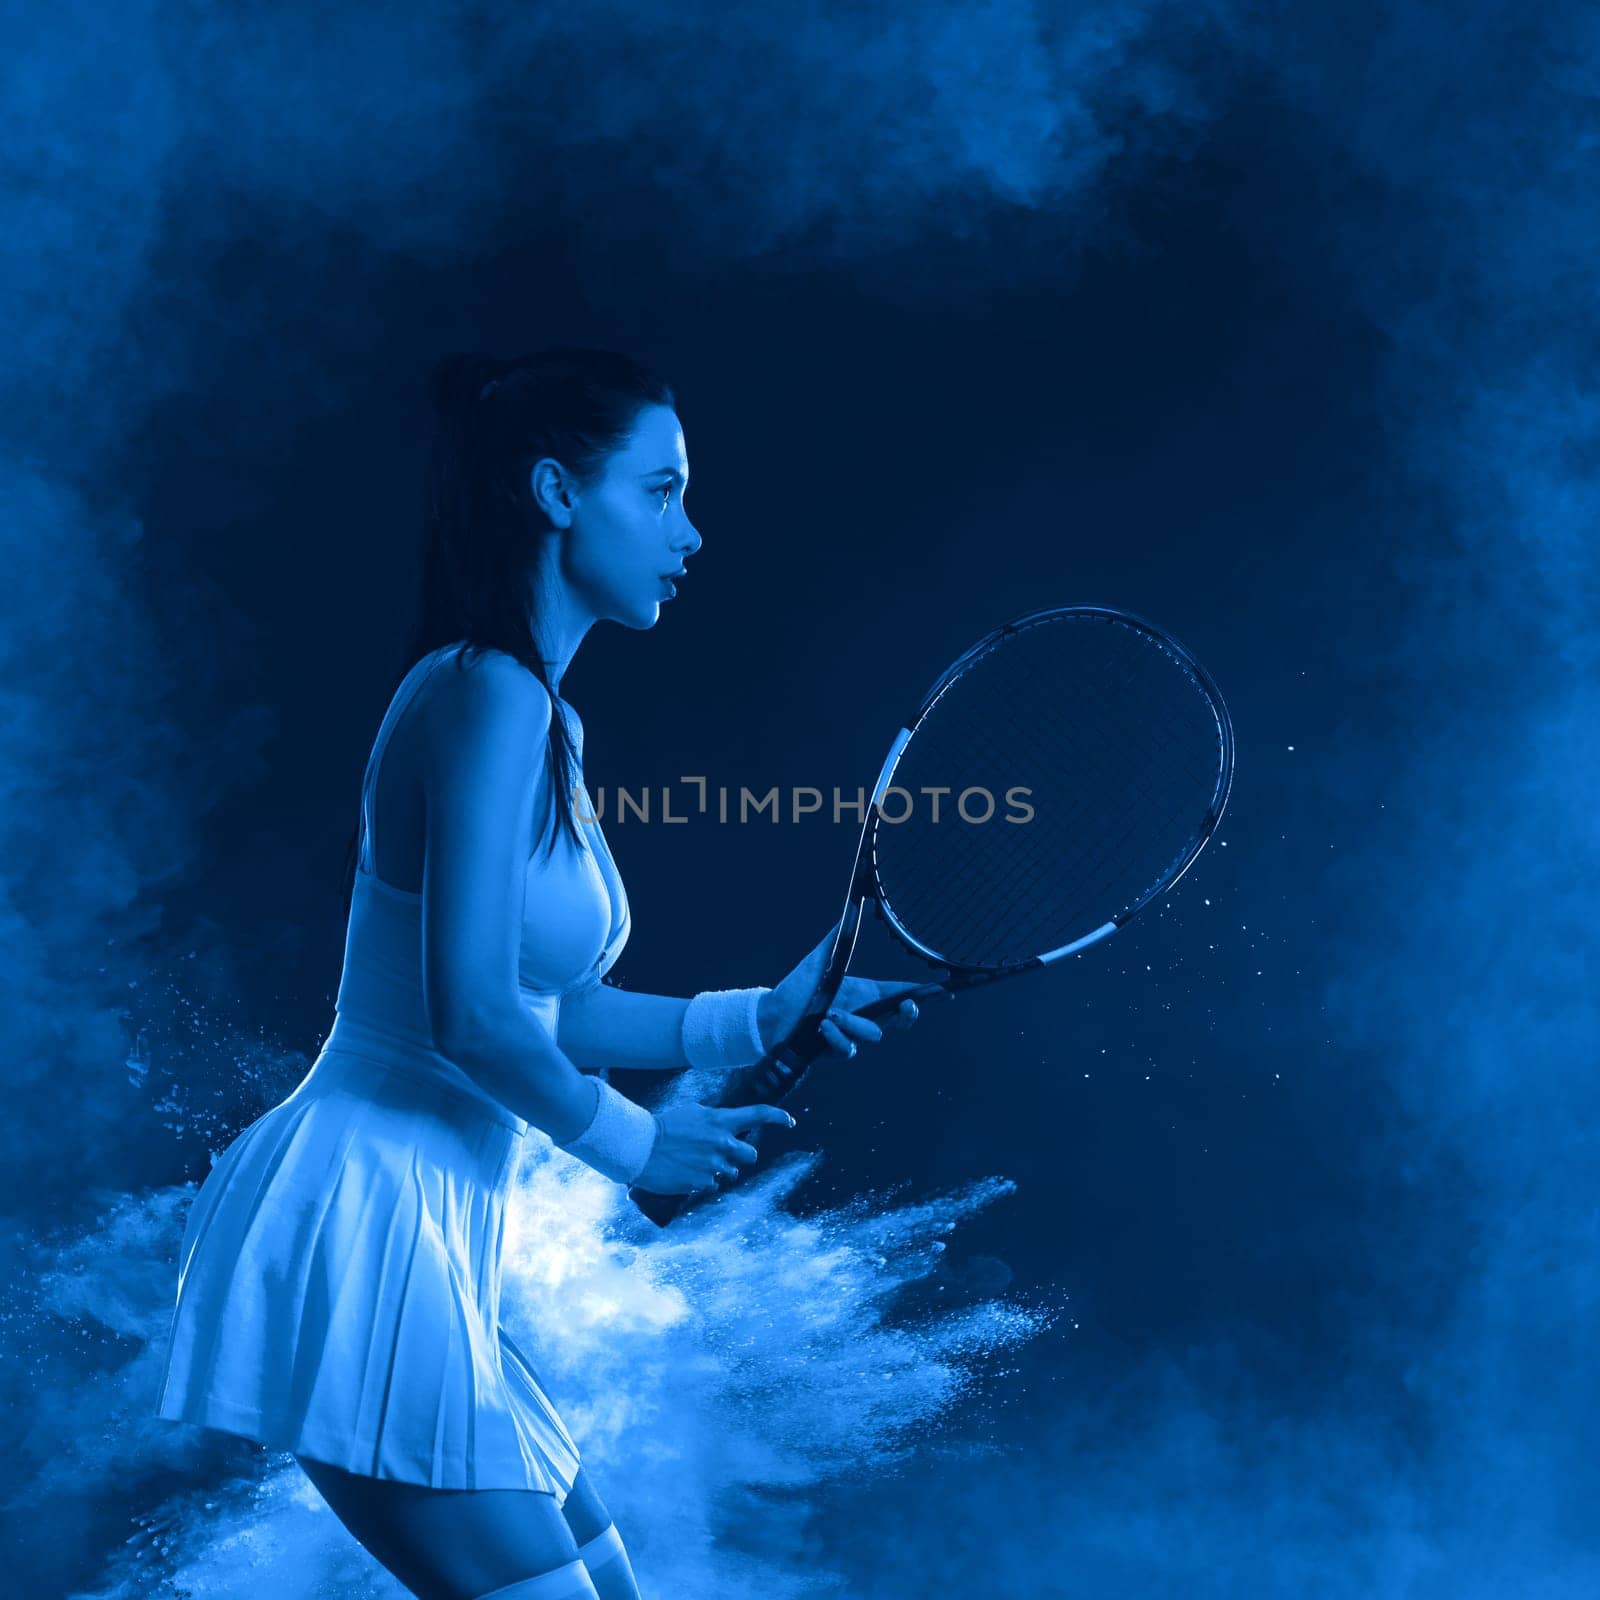 Tennis player with racket. Girl teenager athlete with racket on court with neon colors. Sport concept. Download a high quality photo for the design of a sports app or betting site